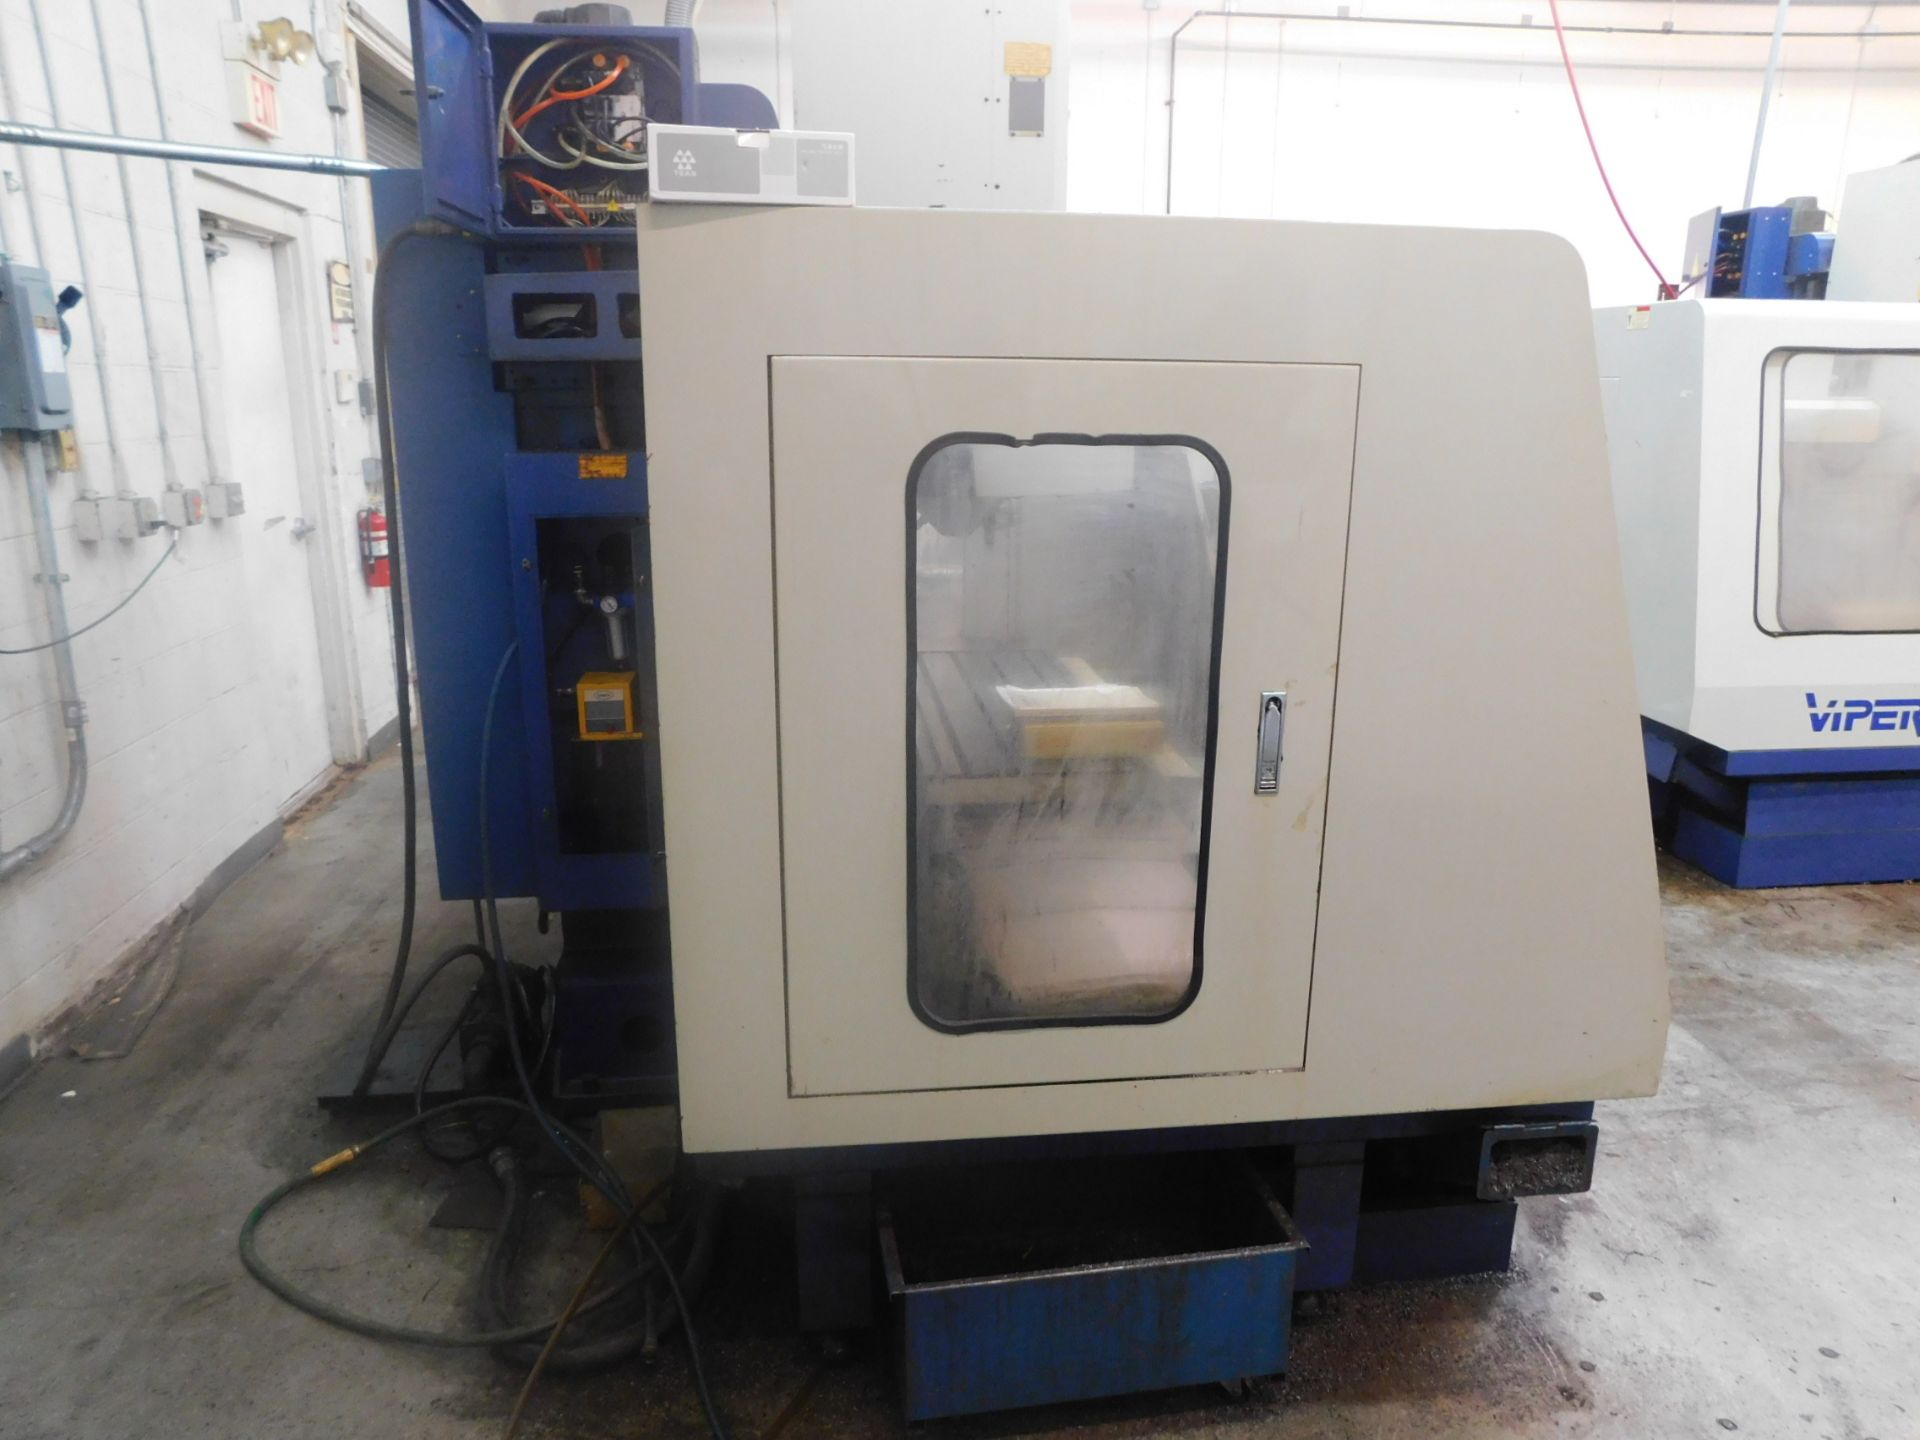 Mighty Viper Model V-950 Vertical Machining Center, SN 002167, New in 1999 with Mitsubishi Meldas 64 - Image 3 of 17